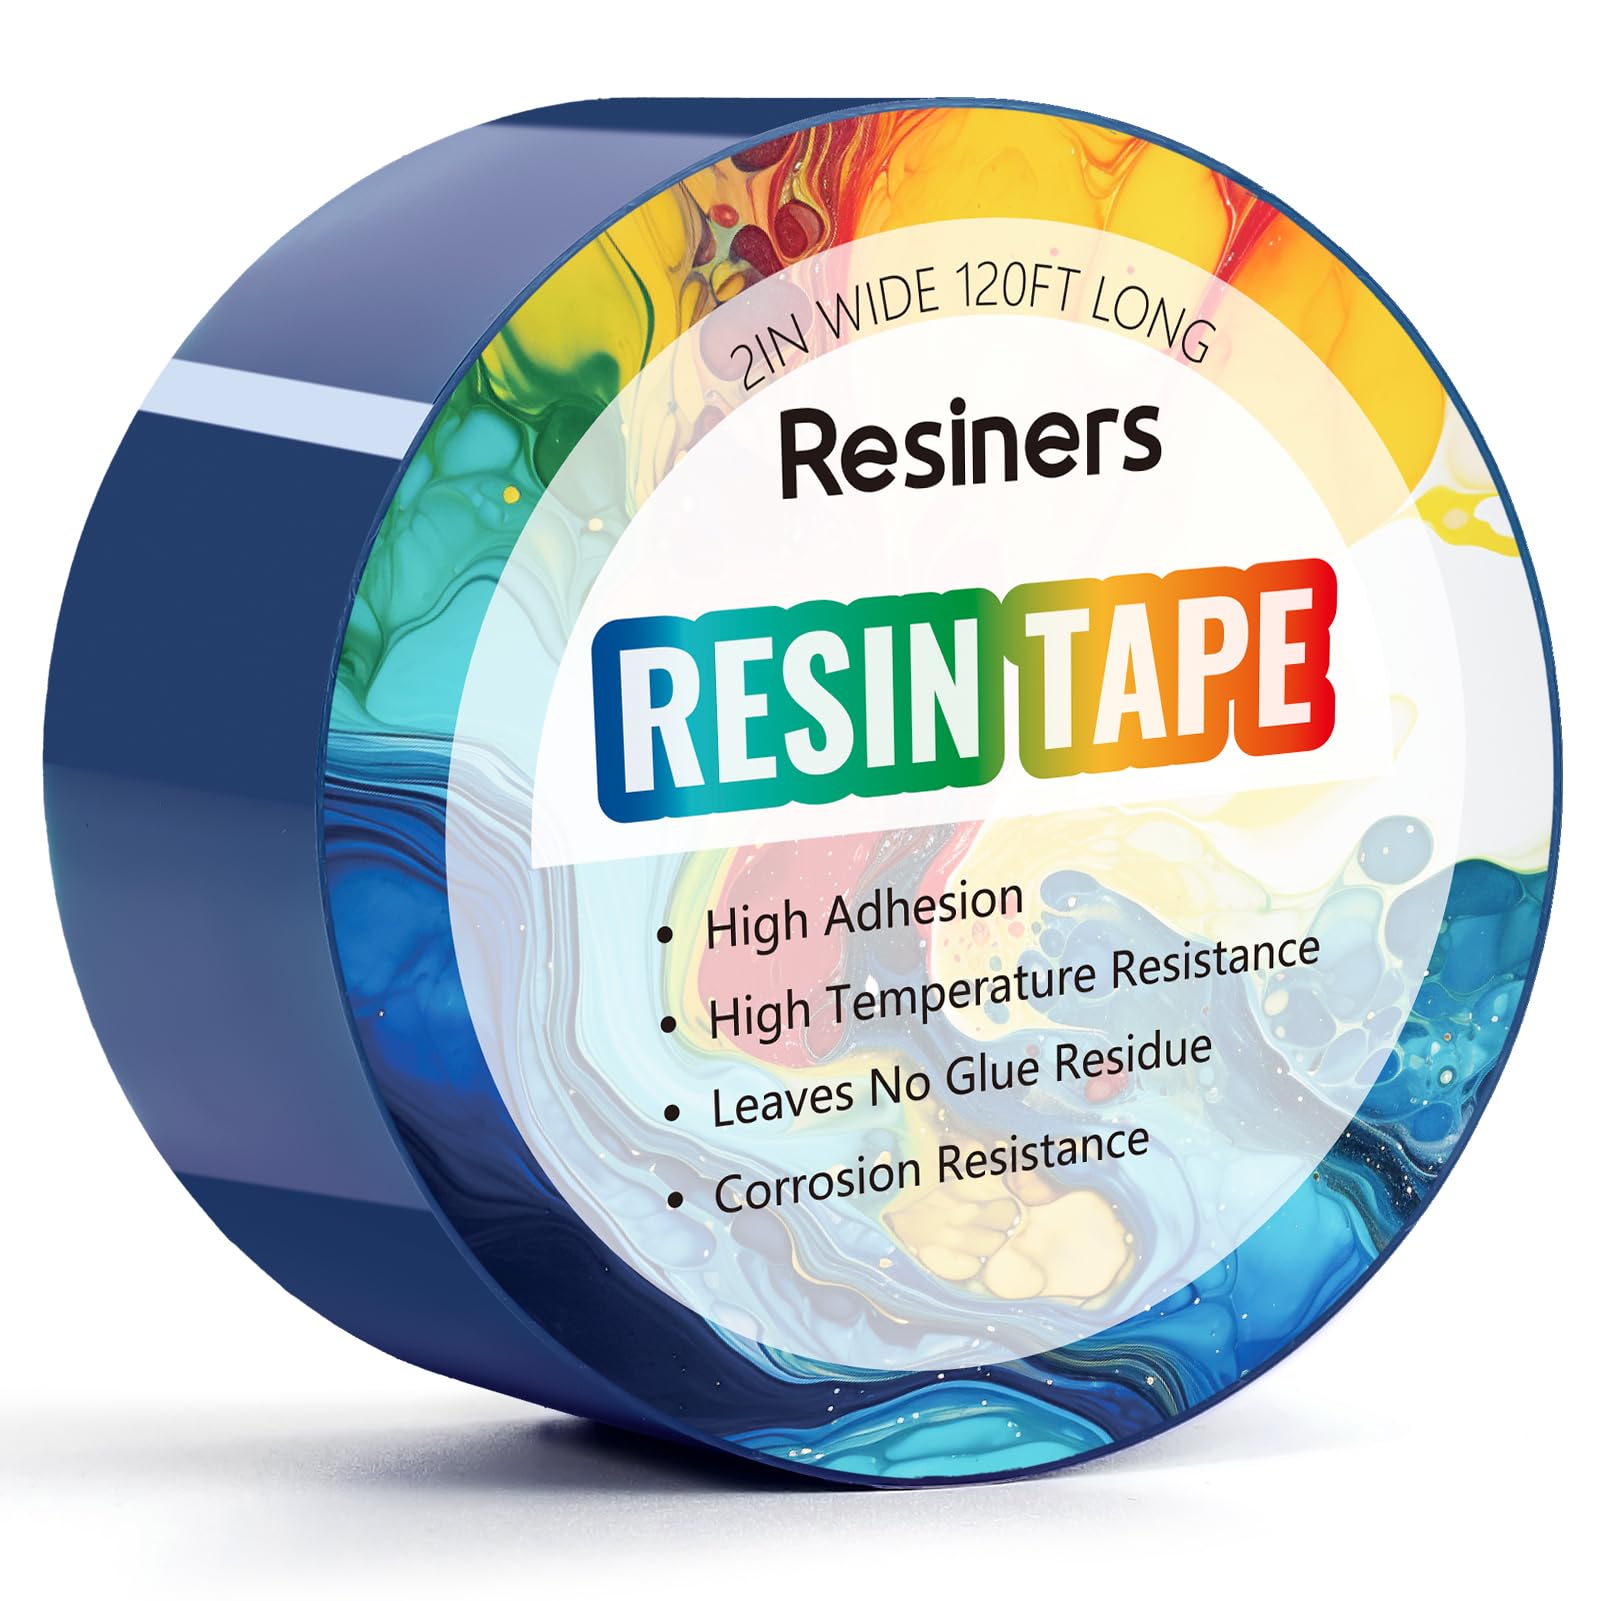 Resiners® Resin Tape for Epoxy Resin MoldingResiners® Resin Tape for Epoxy Resin Molding